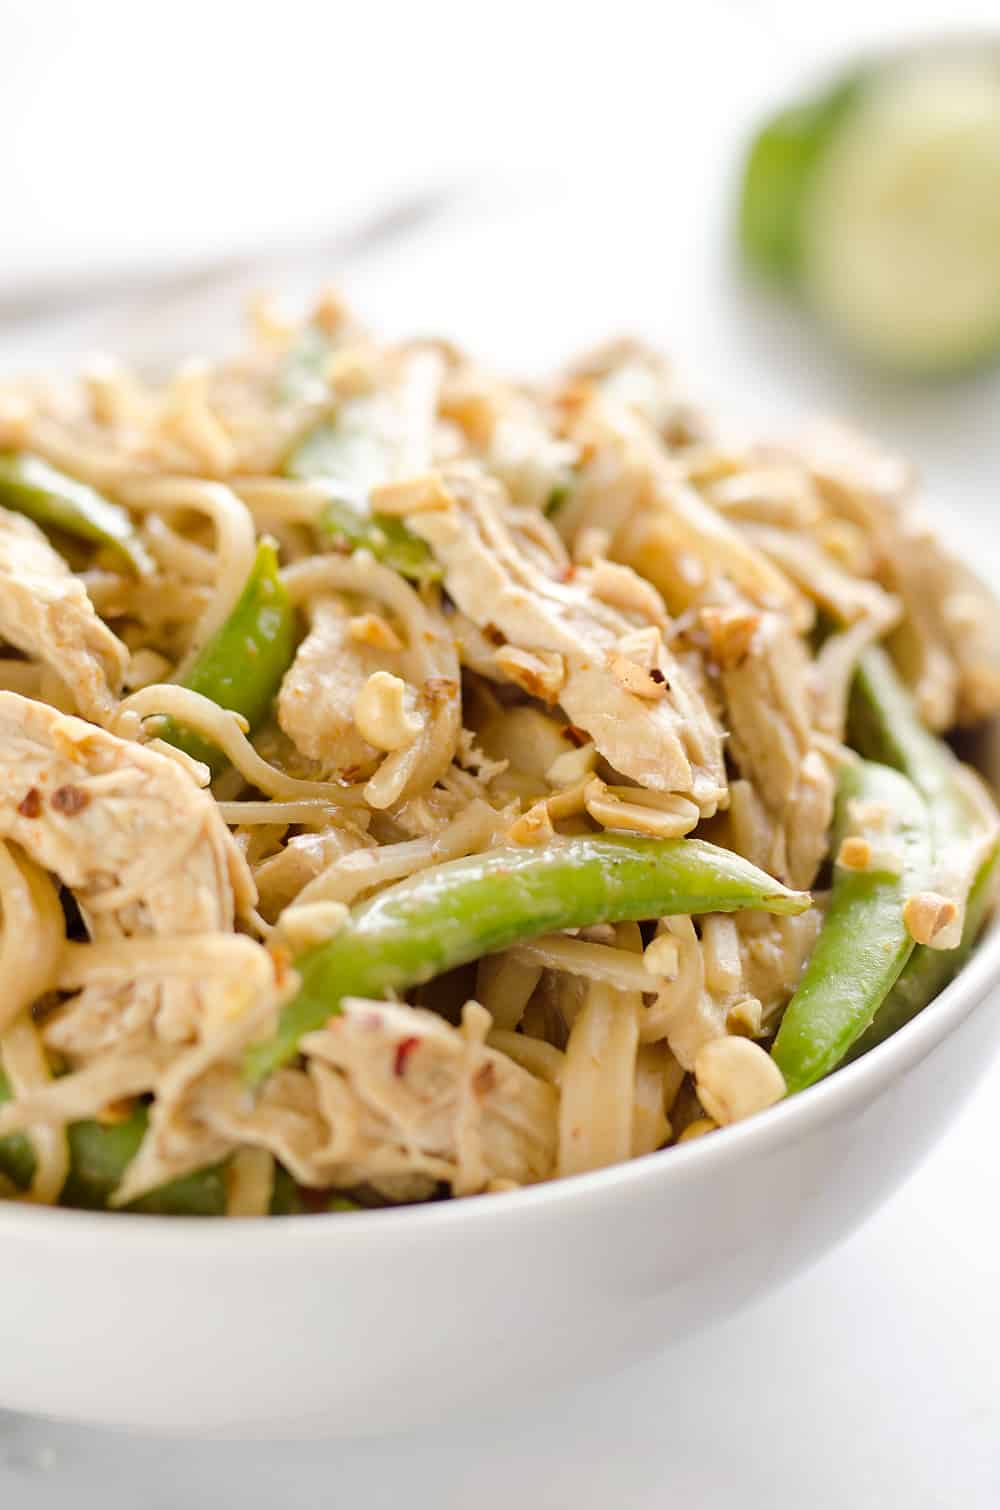 Pressure Cooker Thai Peanut Chicken & Noodles is the best 30 minute Pressure Cooker recipe you will find! Lean chicken breasts are cooked in a homemade spicy Thai peanut sauce and finished off with rice noodles and peas for an easy and healthy one-pot meal made in your Instant Pot.